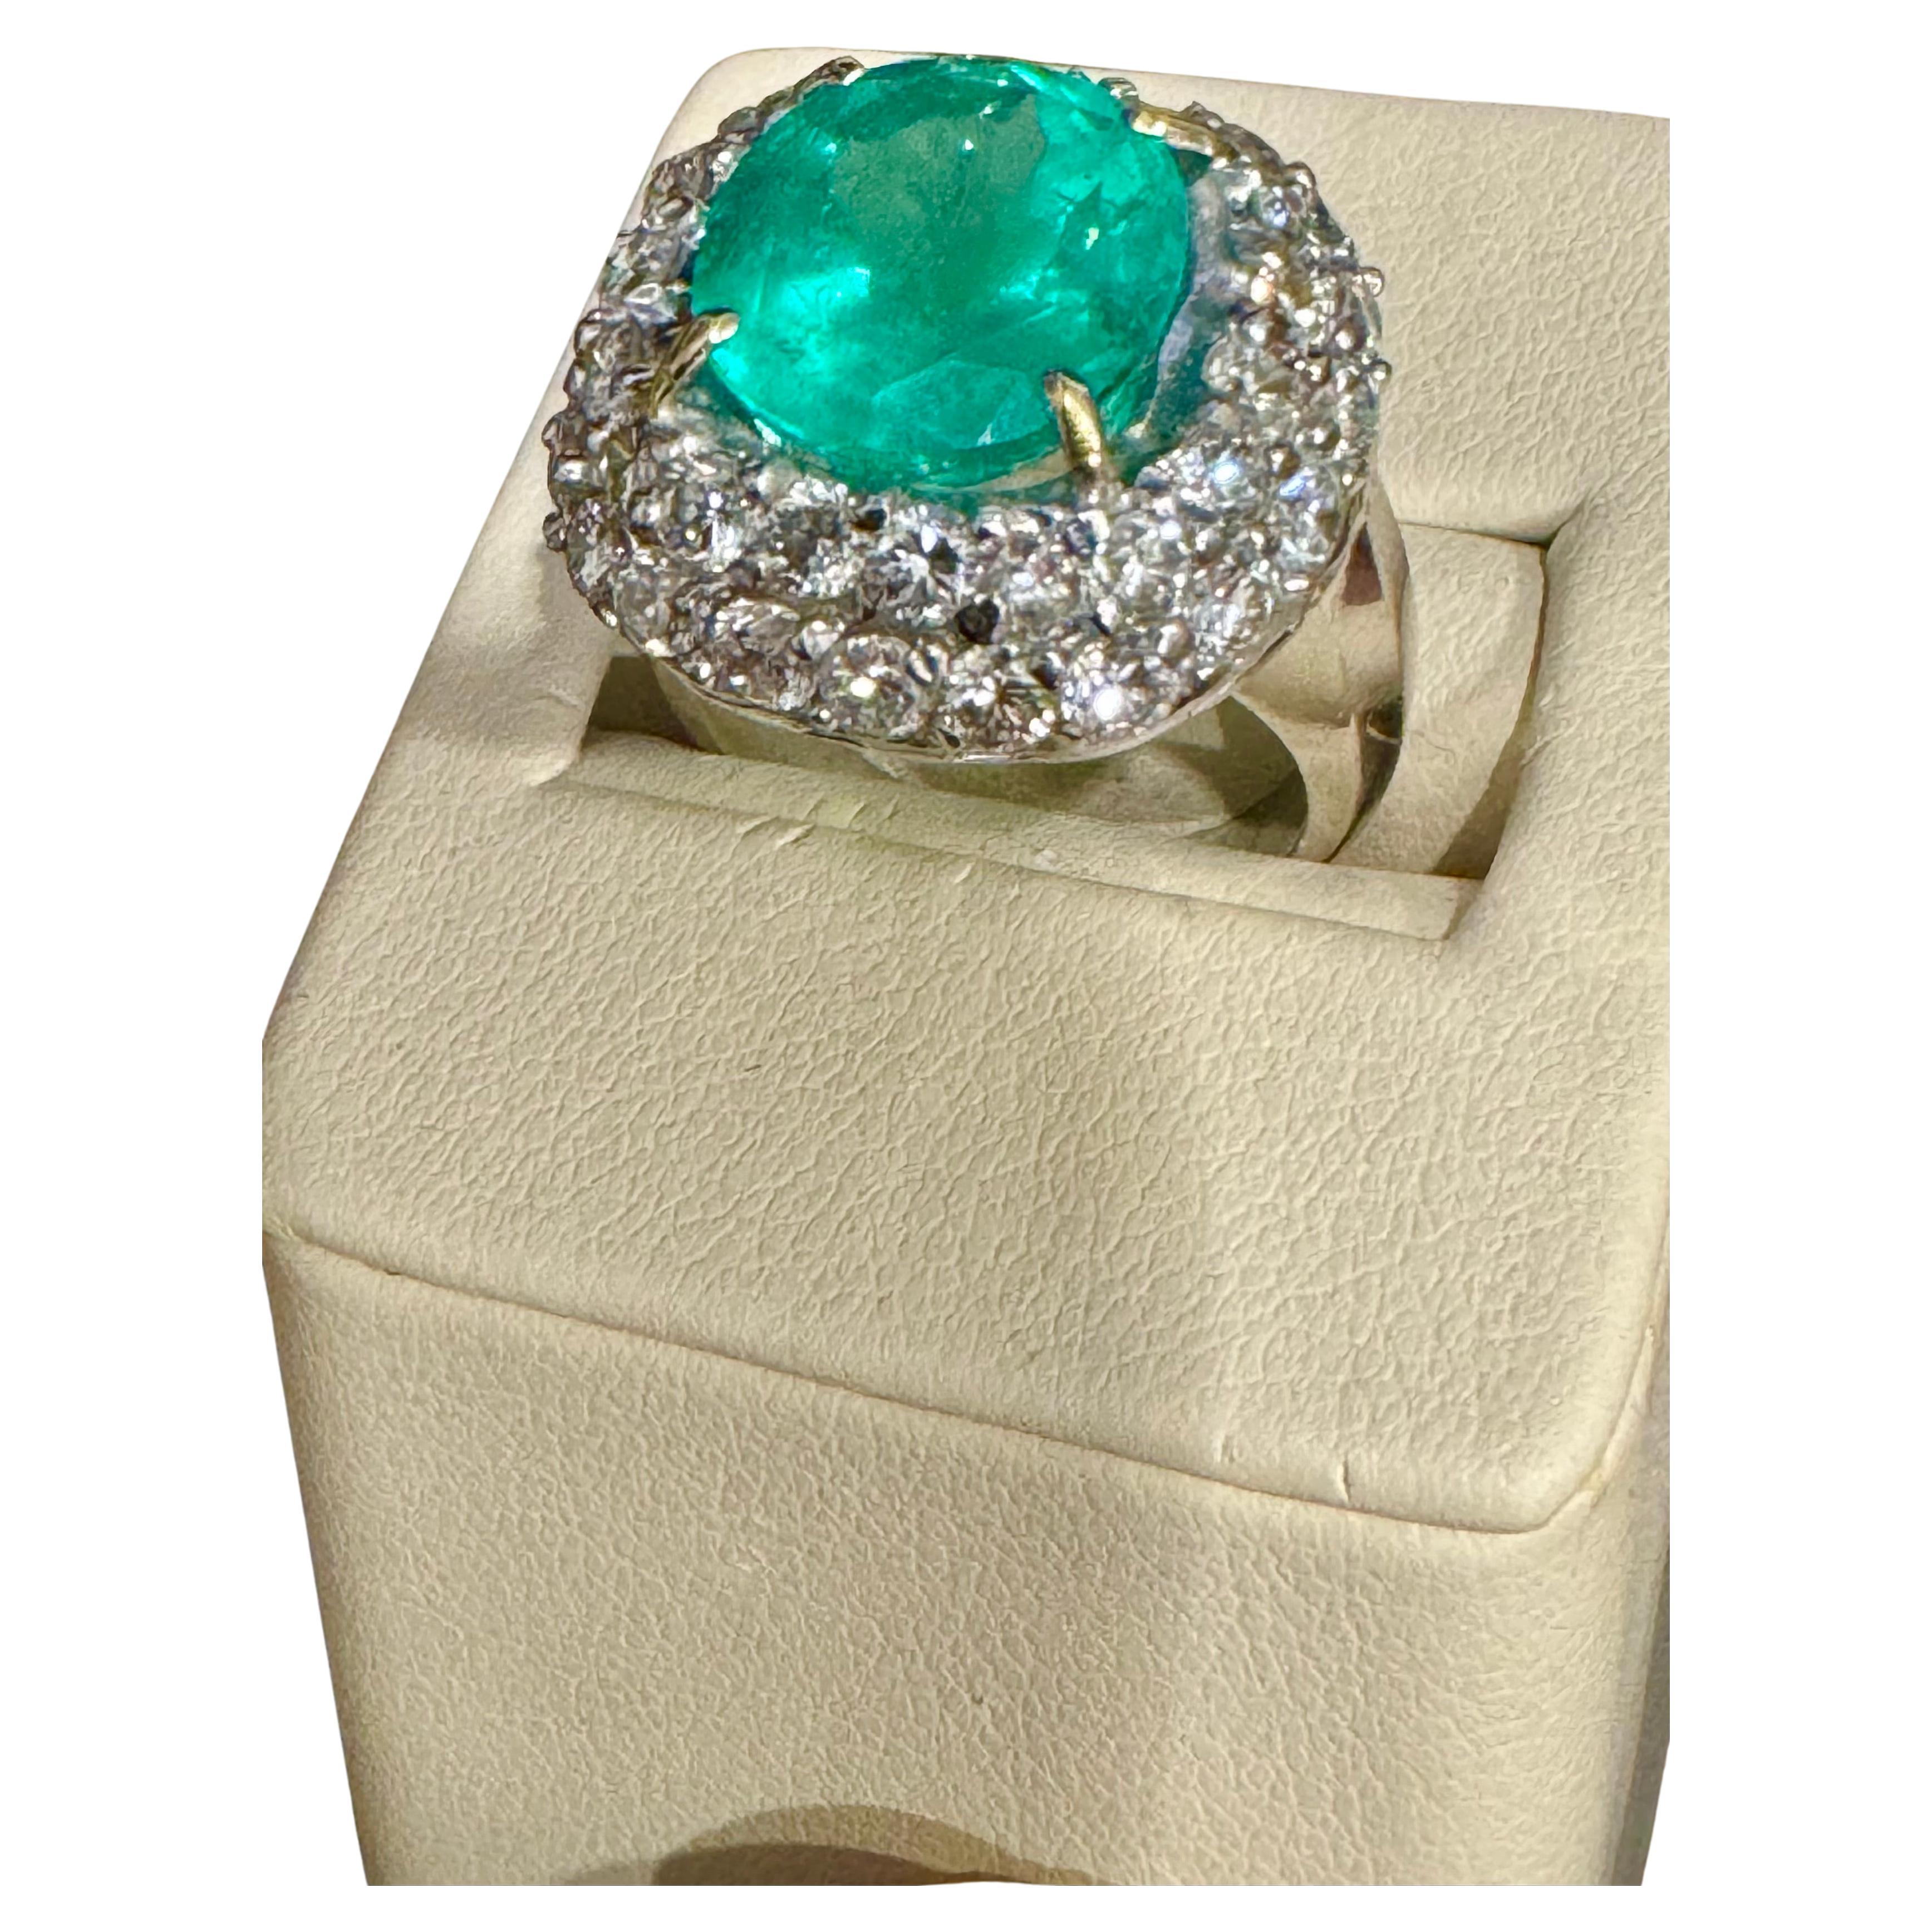 7 Carat Cushion Cut Colombian Emerald & 3.5 Ct Diamond Ring in Platinum Size 6.2 In Excellent Condition For Sale In New York, NY